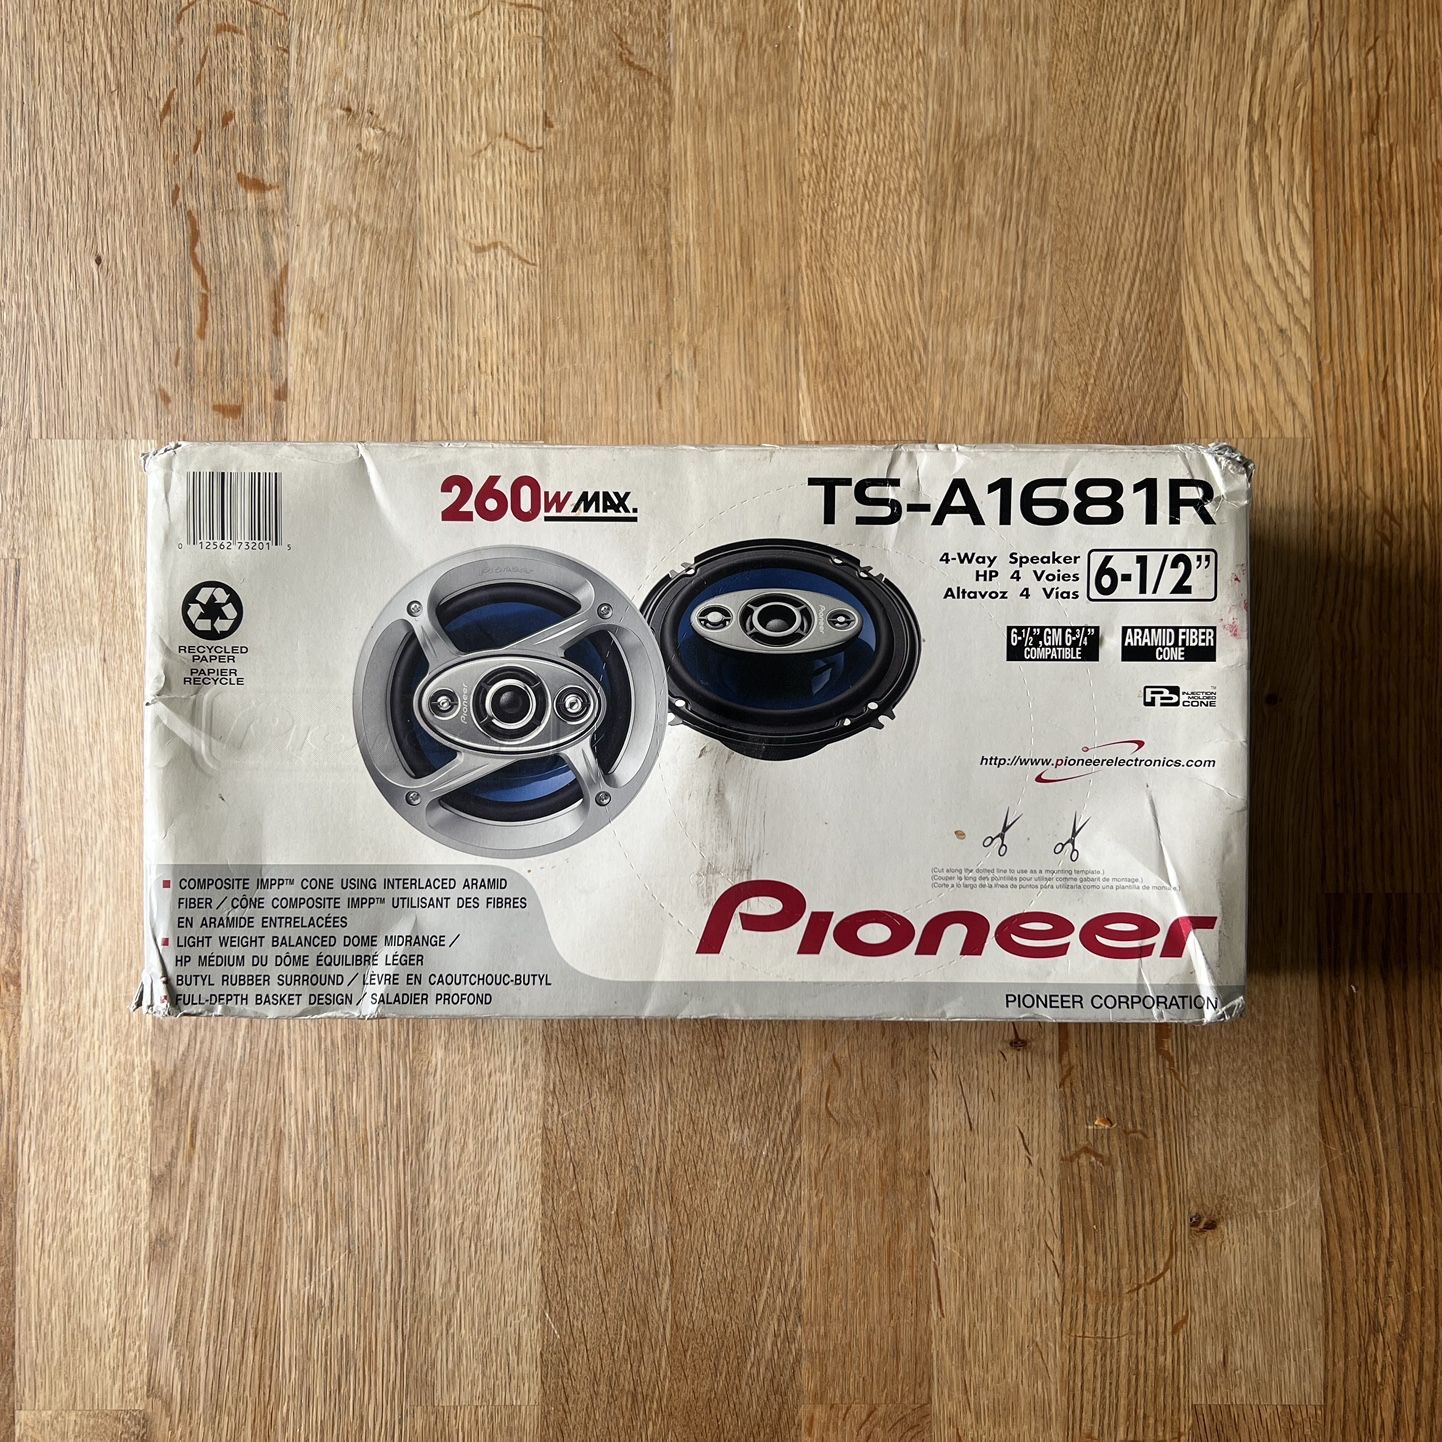 Pioneer TS-A1681R - 6-1/2" 4-way car speakers For 6-1/2" and 6-3/4" openings / New Open Box 